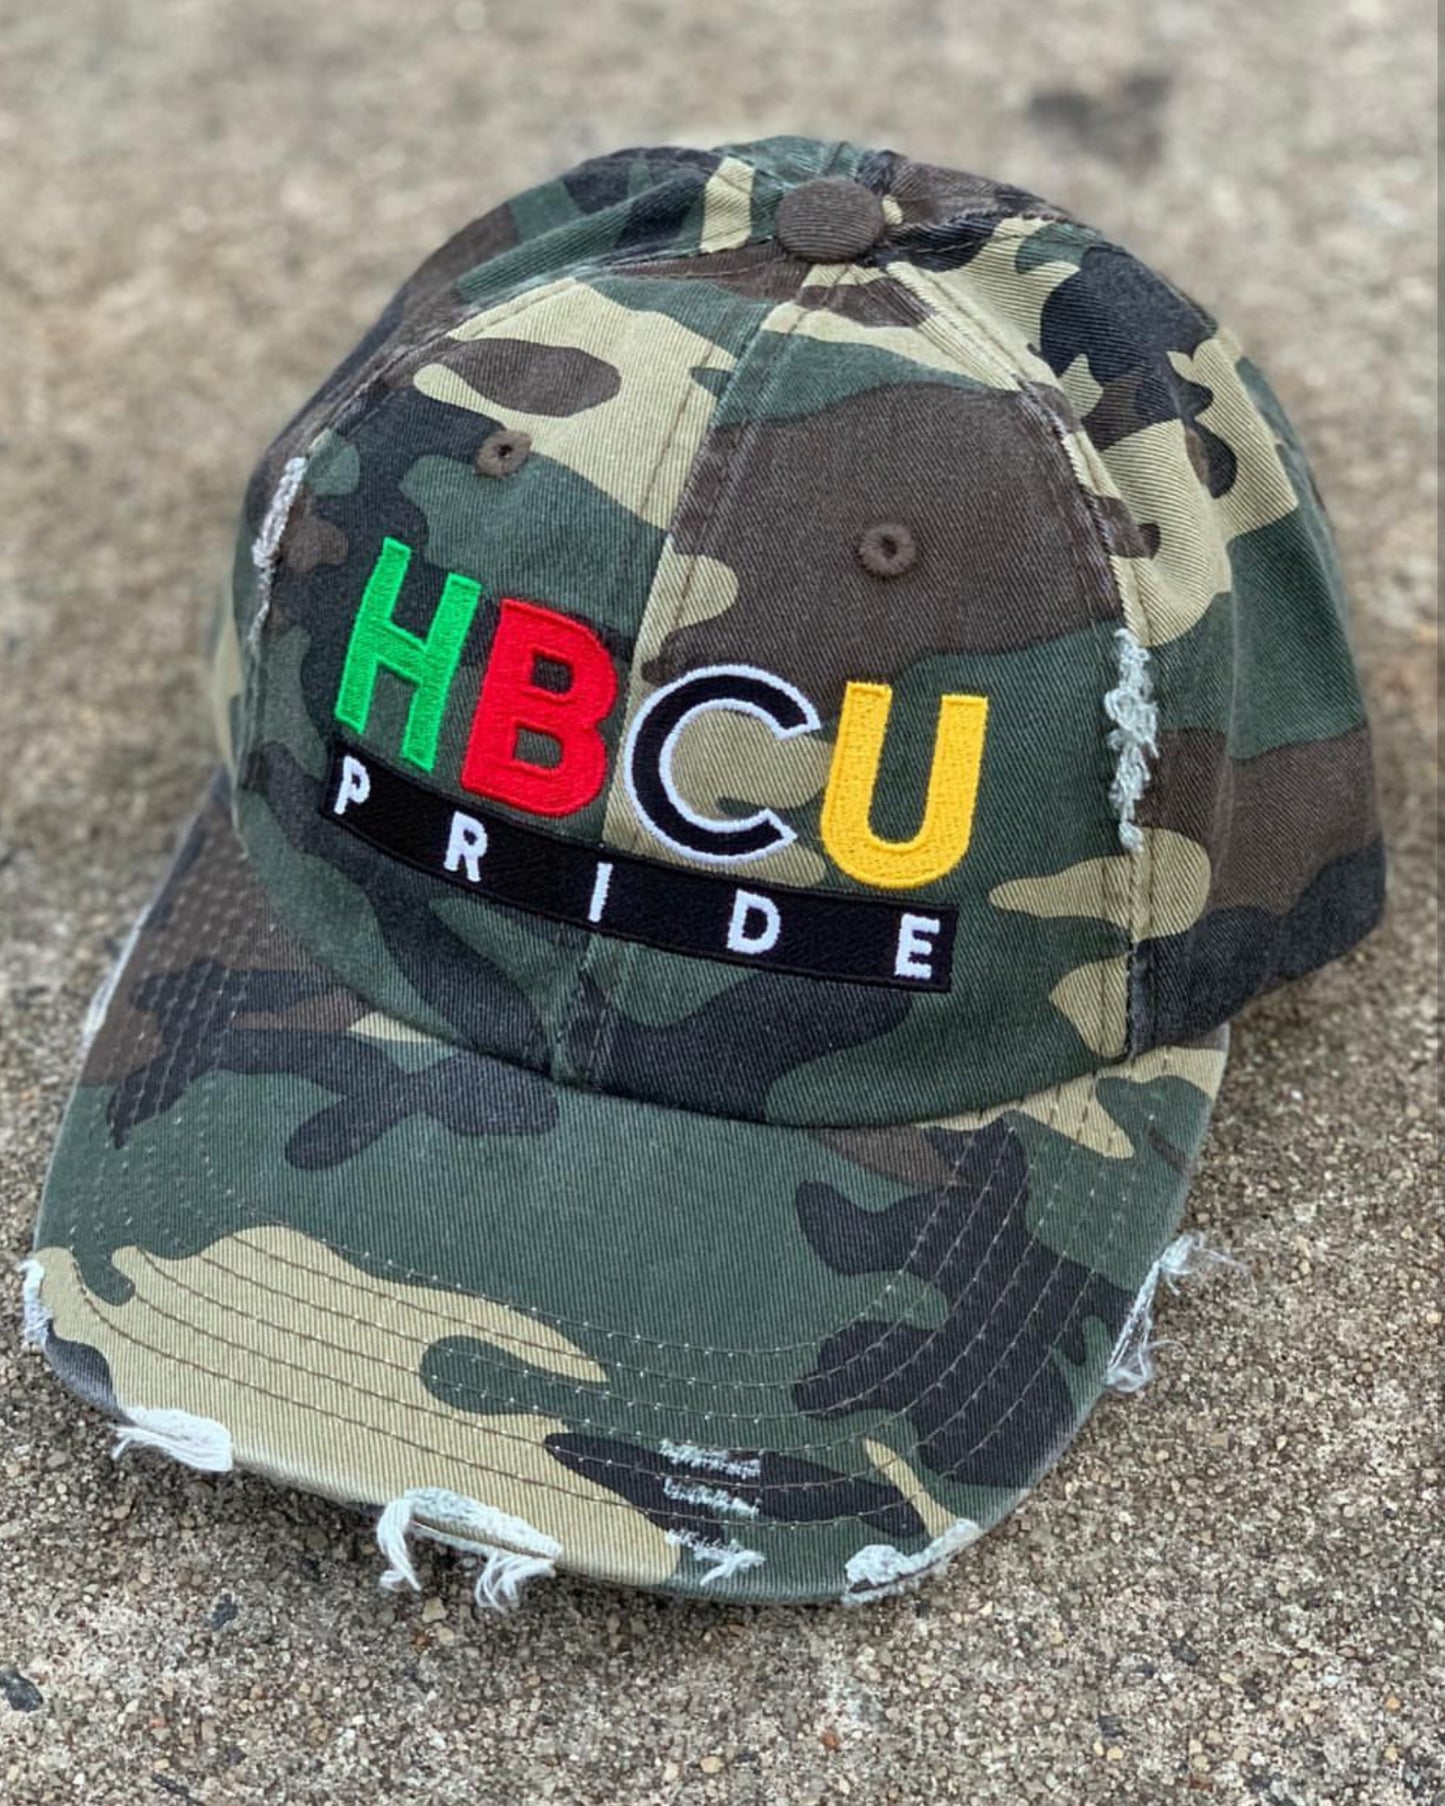 The "Disguise" HBCU Pride Banner Distressed Hat in Camo